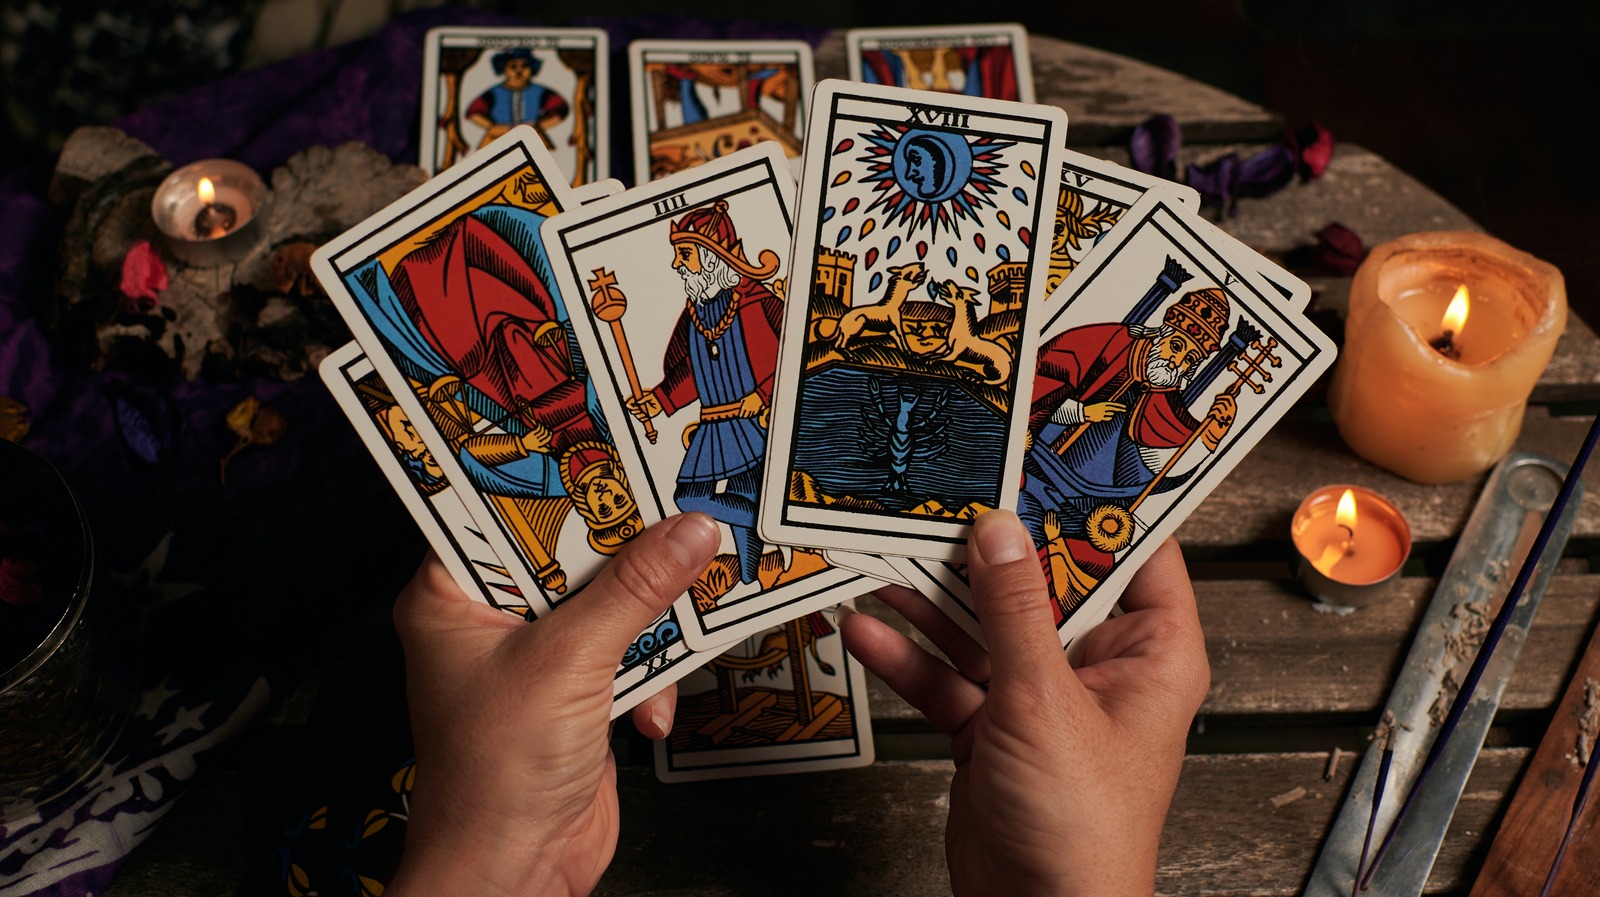 Cups, Wands, Swords, And Pentacles: What The Suits Of Tarot